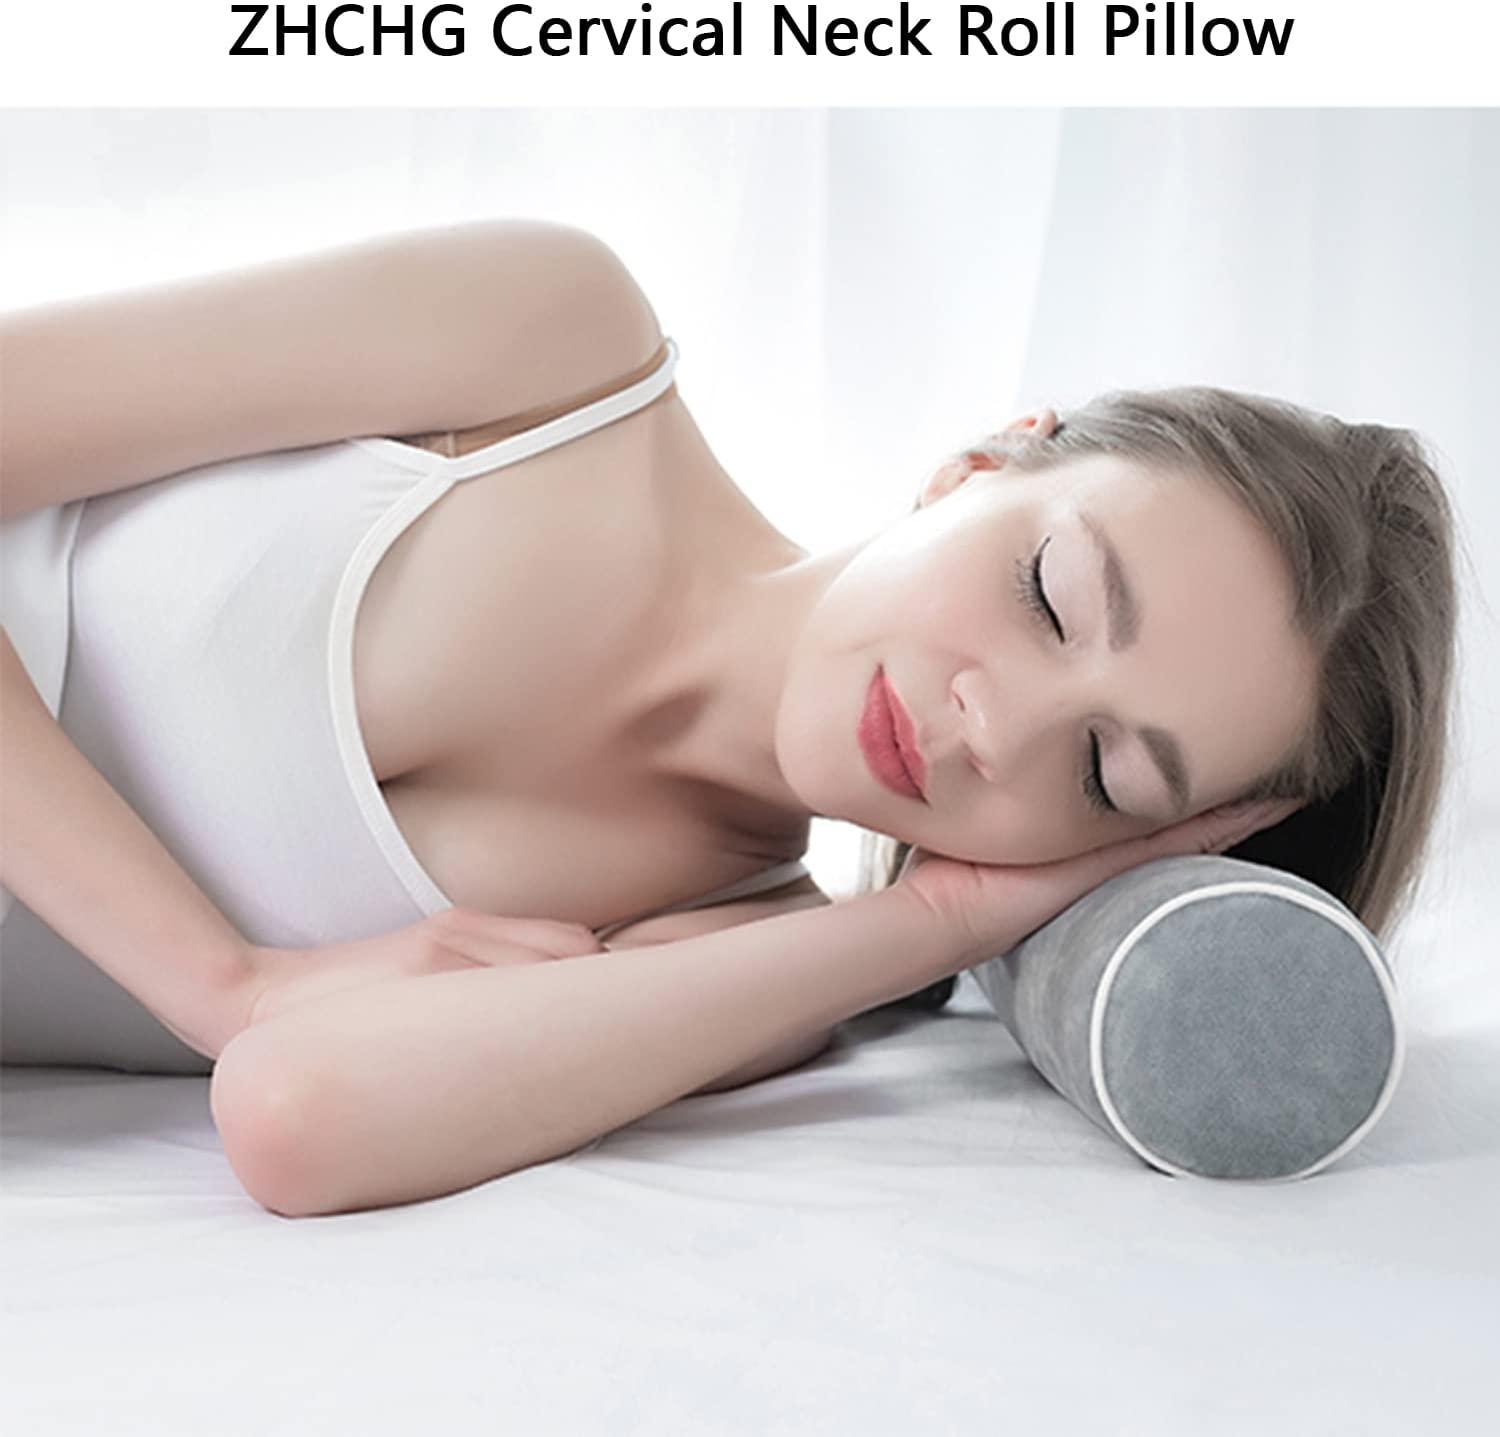 ZHCHG Cervical Neck Roll Pillow- Memory Foam Cylinder Pillow for Sleeping,  Round Pillow for Neck, Spine Discomfort, Knees and Yoga- Washable Cover  Dark Grey Small